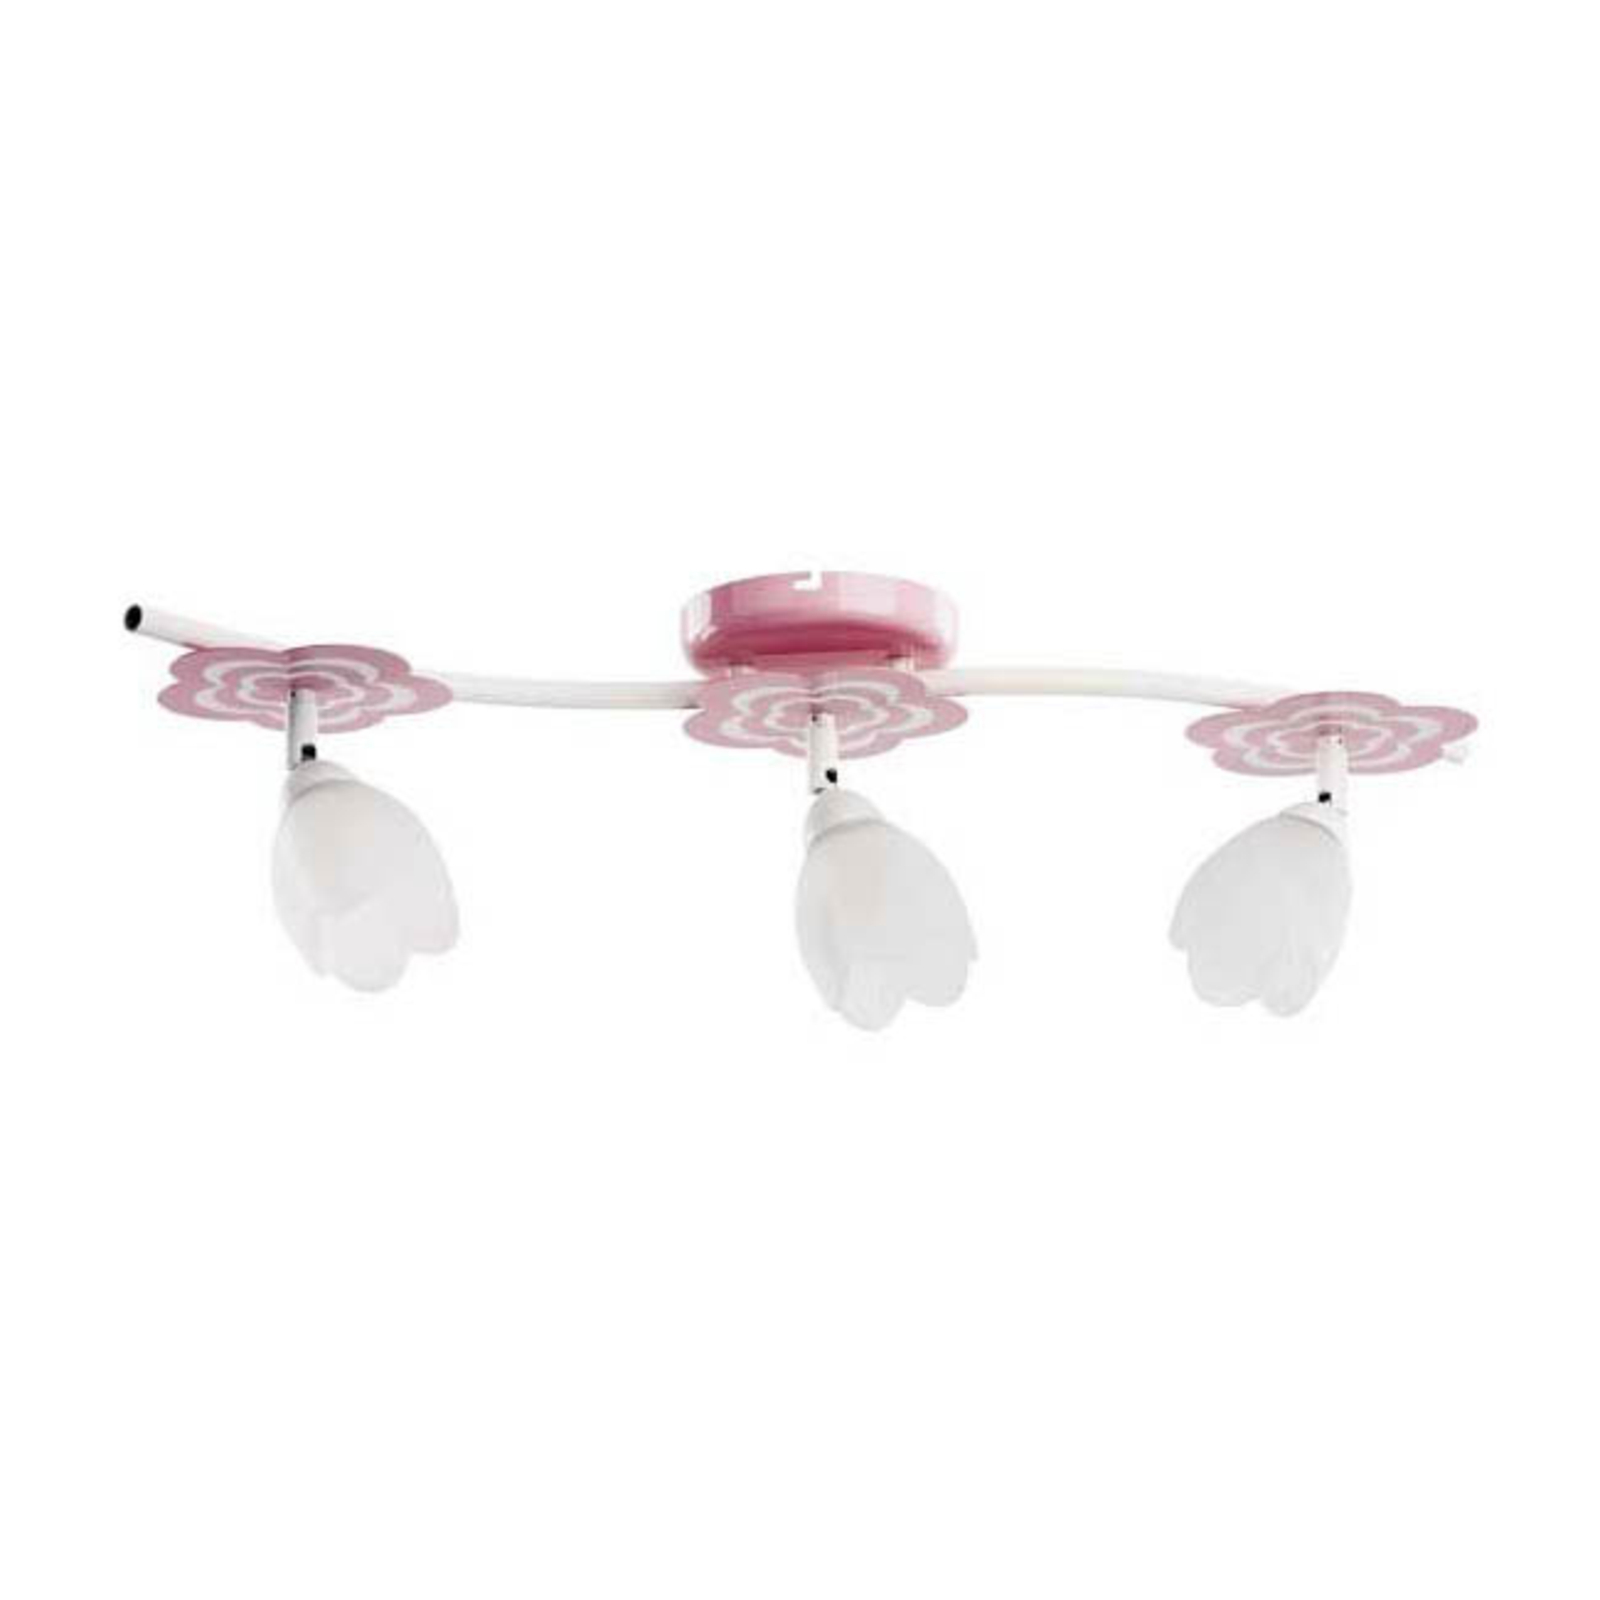 Mailin children's ceiling light in pink long